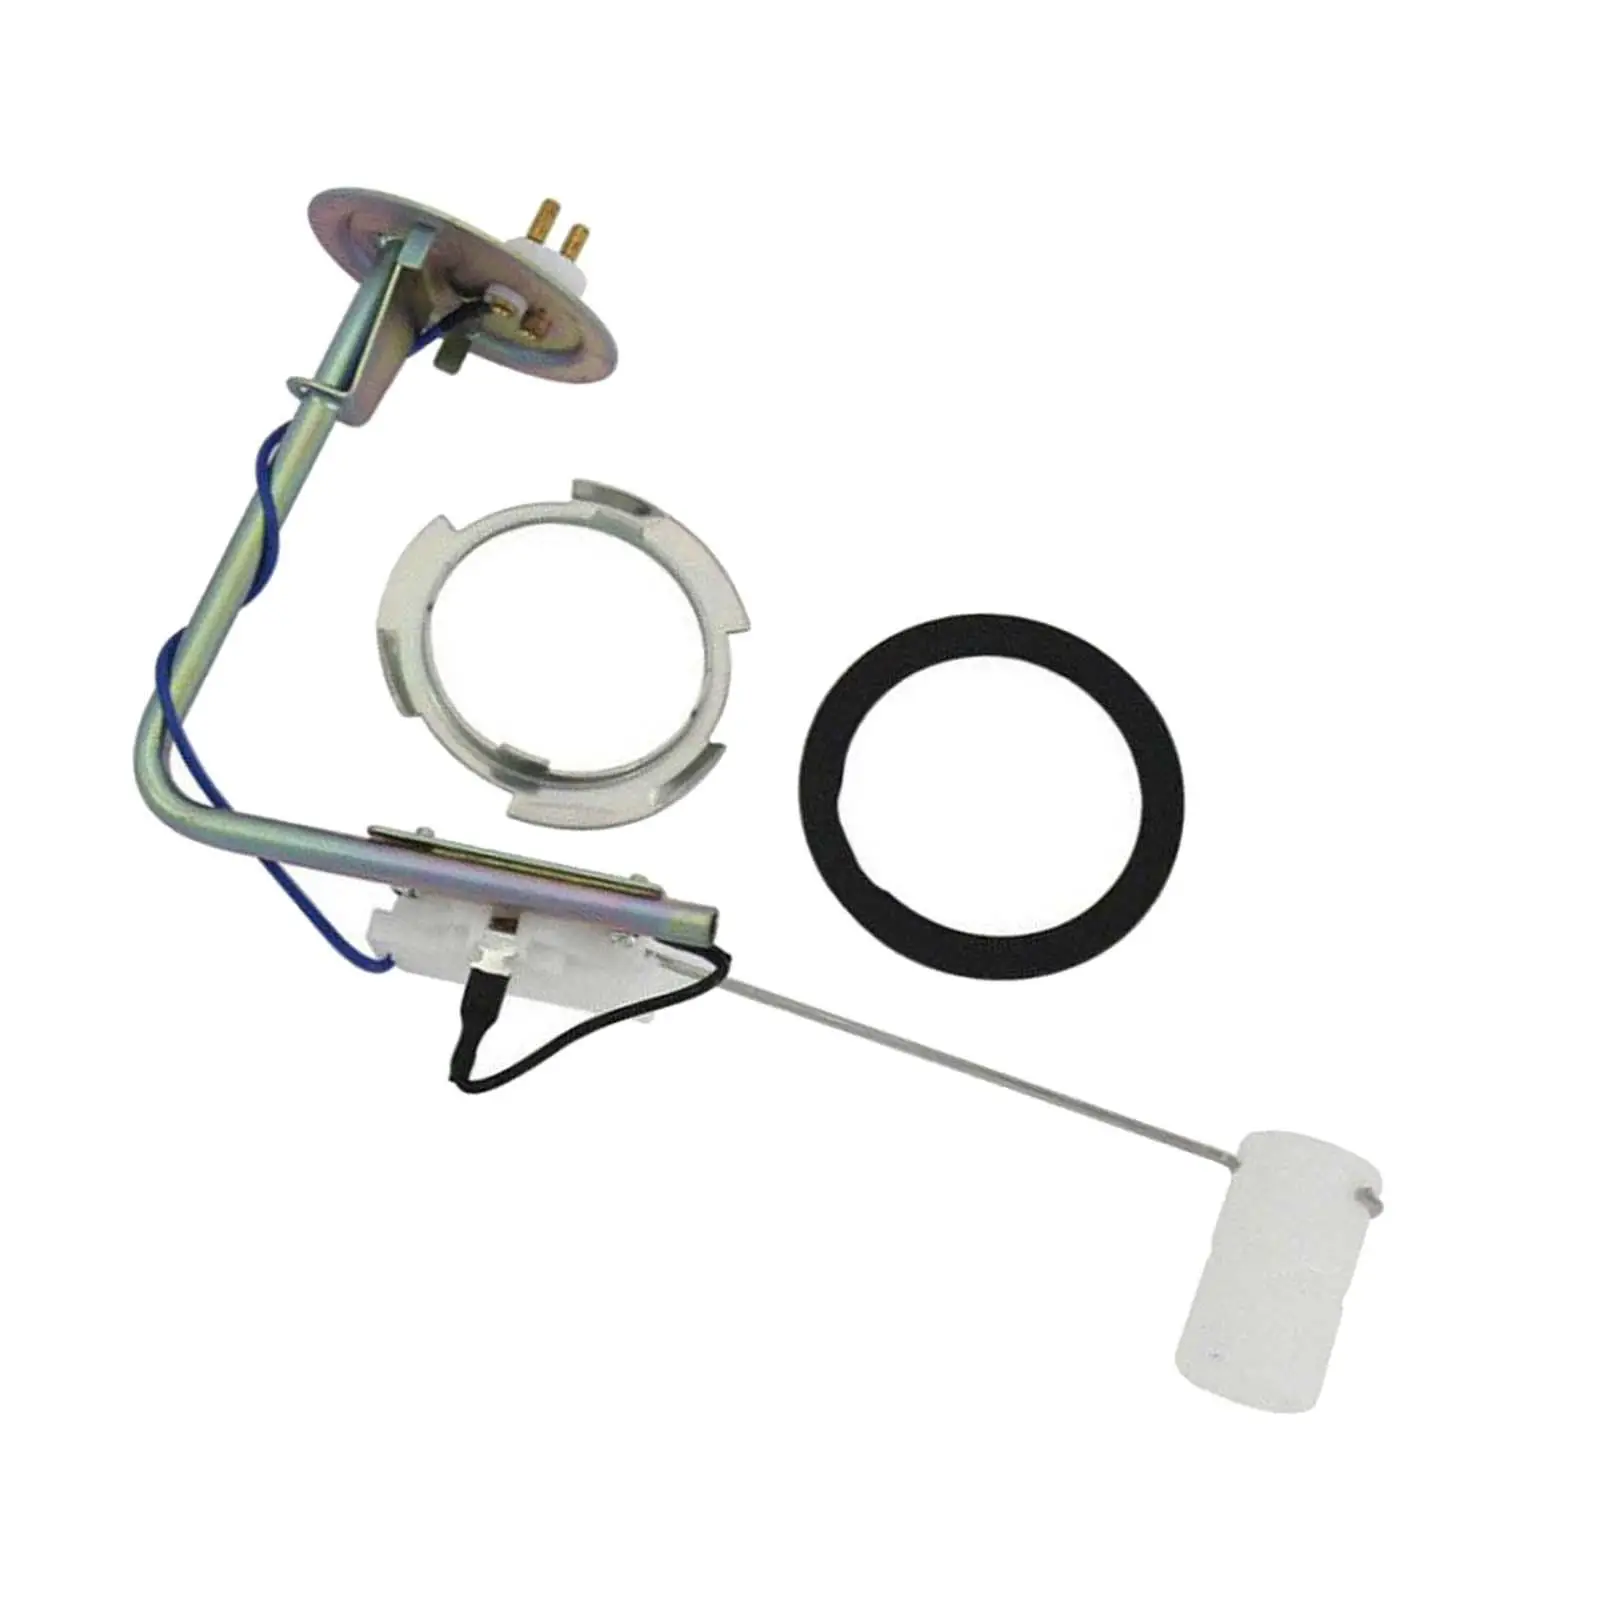 Fuel Pump Sender Replacement E0LY-9275-b for Lincoln Mercury 1980-1989